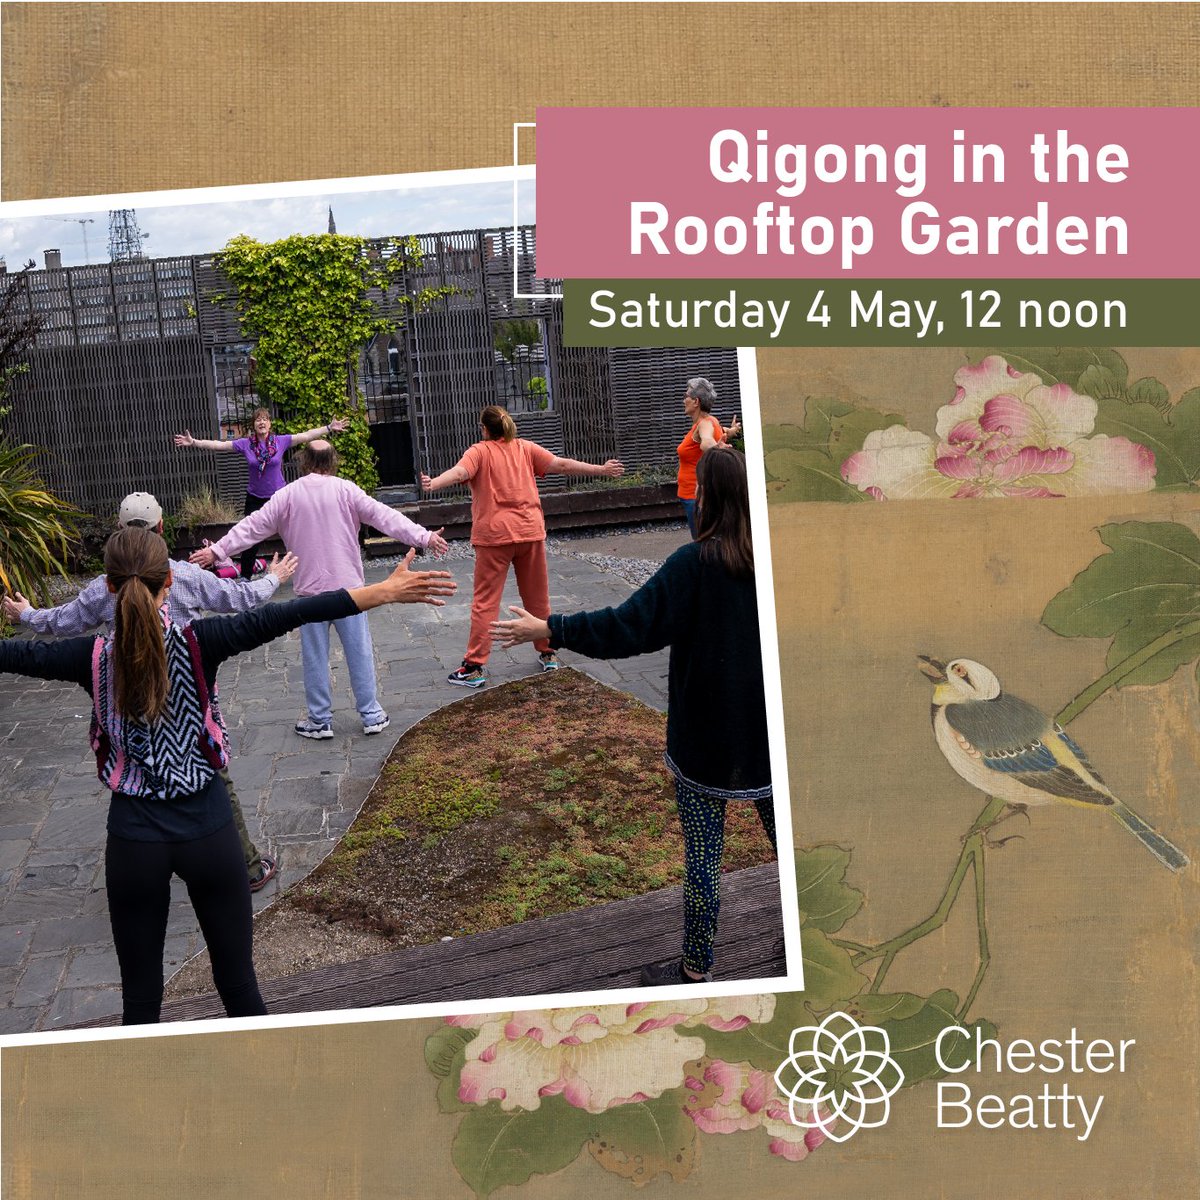 Qigong is a traditional Chinese form of meditation. Join us for a gentle practice outdoors (weather permitting) or indoors with a view of the roof garden. Suitable for all ages. Limited to 20 participants. FREE, no booking required. #LoveDublin #ChesterBeatty #Well-being